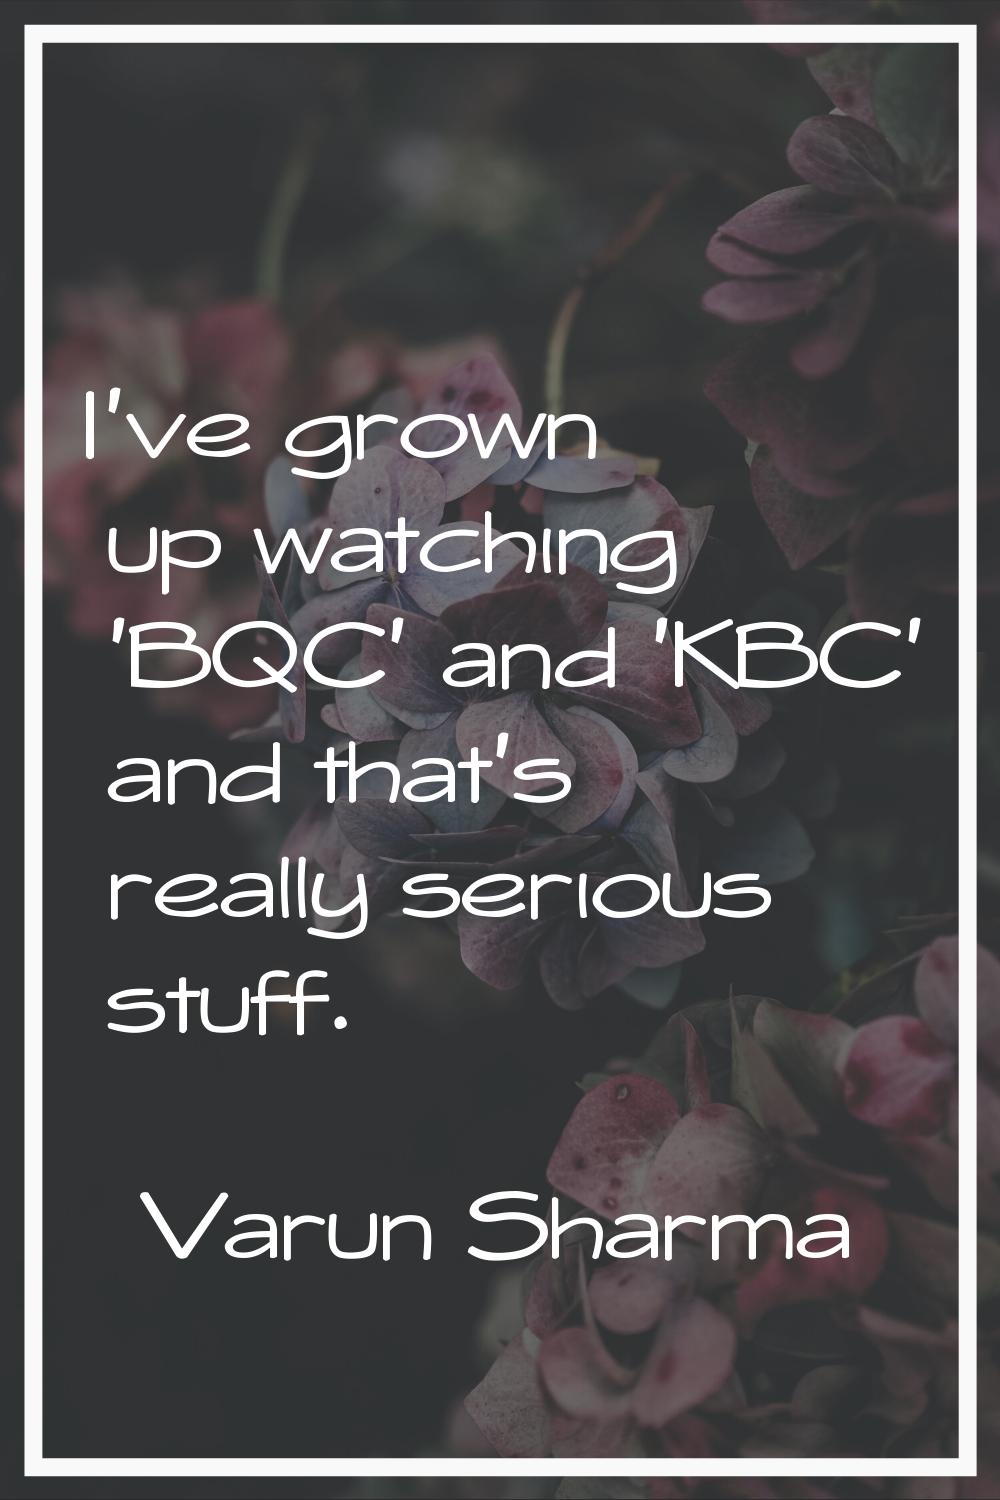 I've grown up watching 'BQC' and 'KBC' and that's really serious stuff.